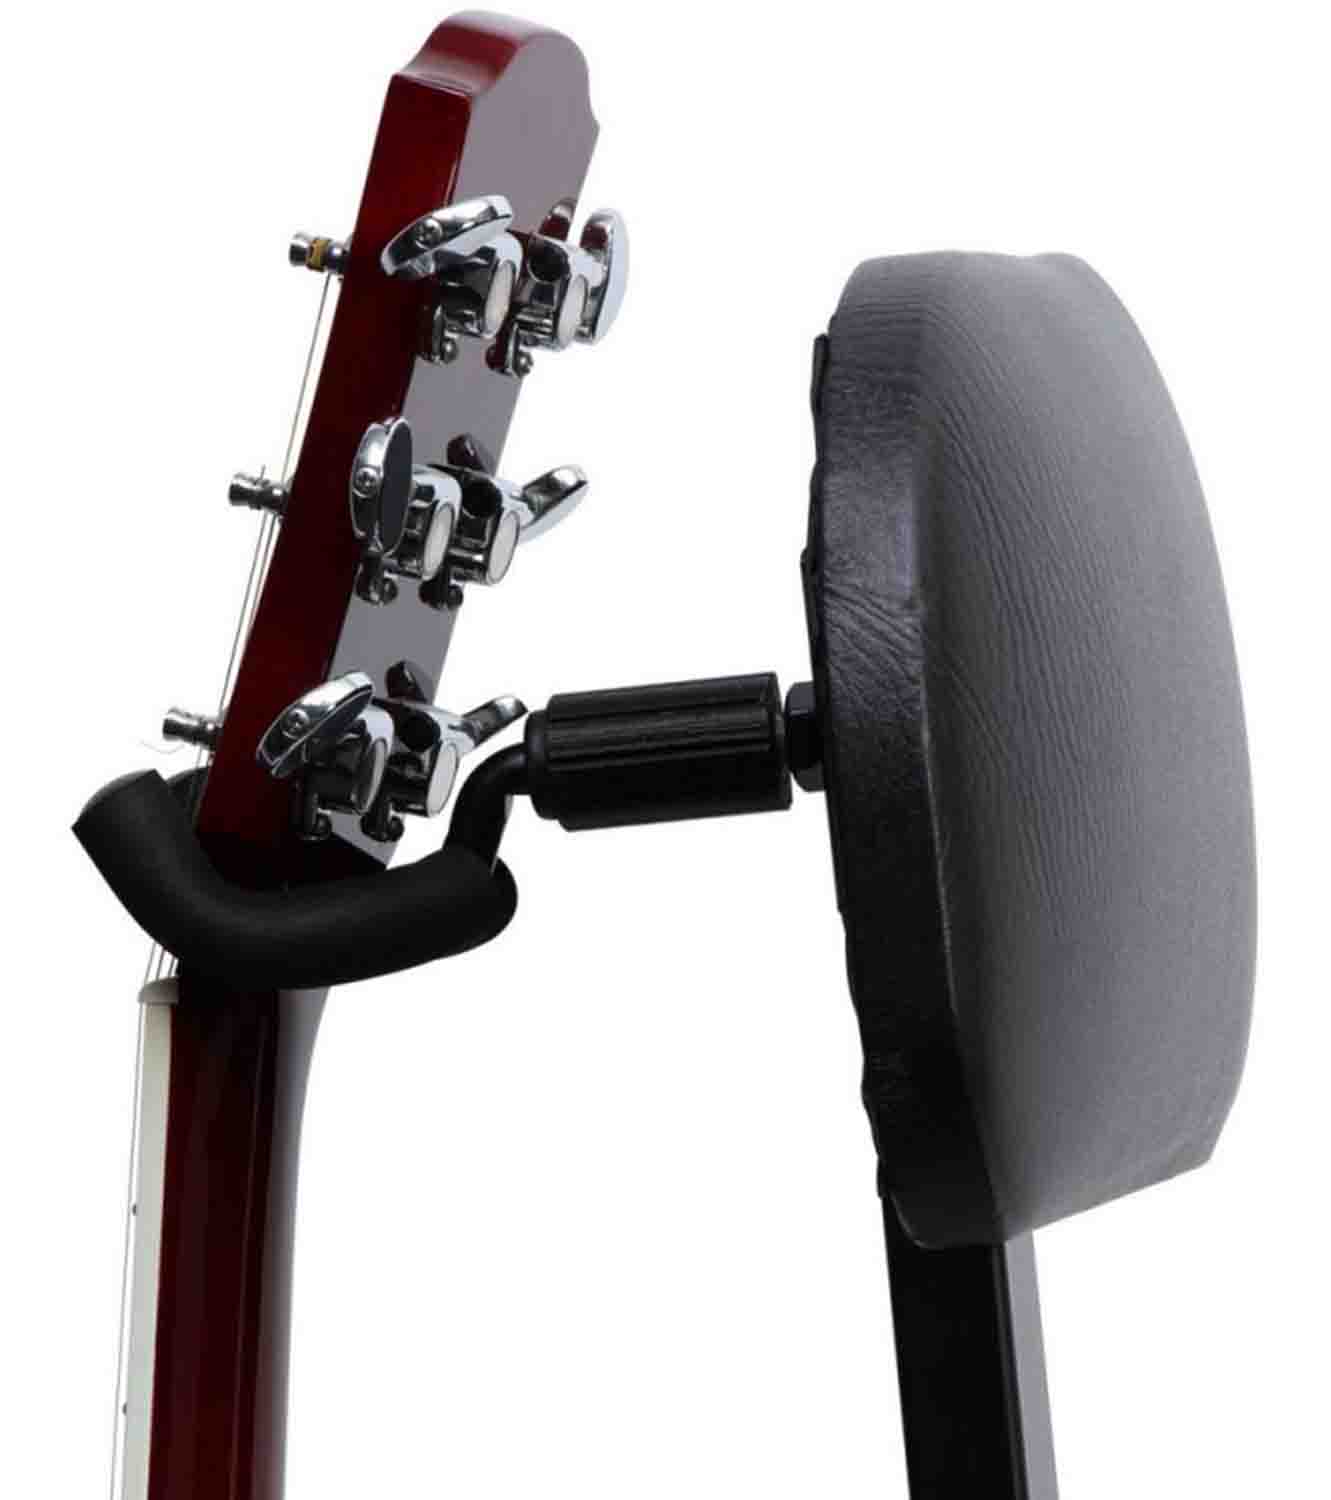 OnStage GS7710 Guitar Hanger for Dt8500 Guitar and Keyboard Throne - Hollywood DJ